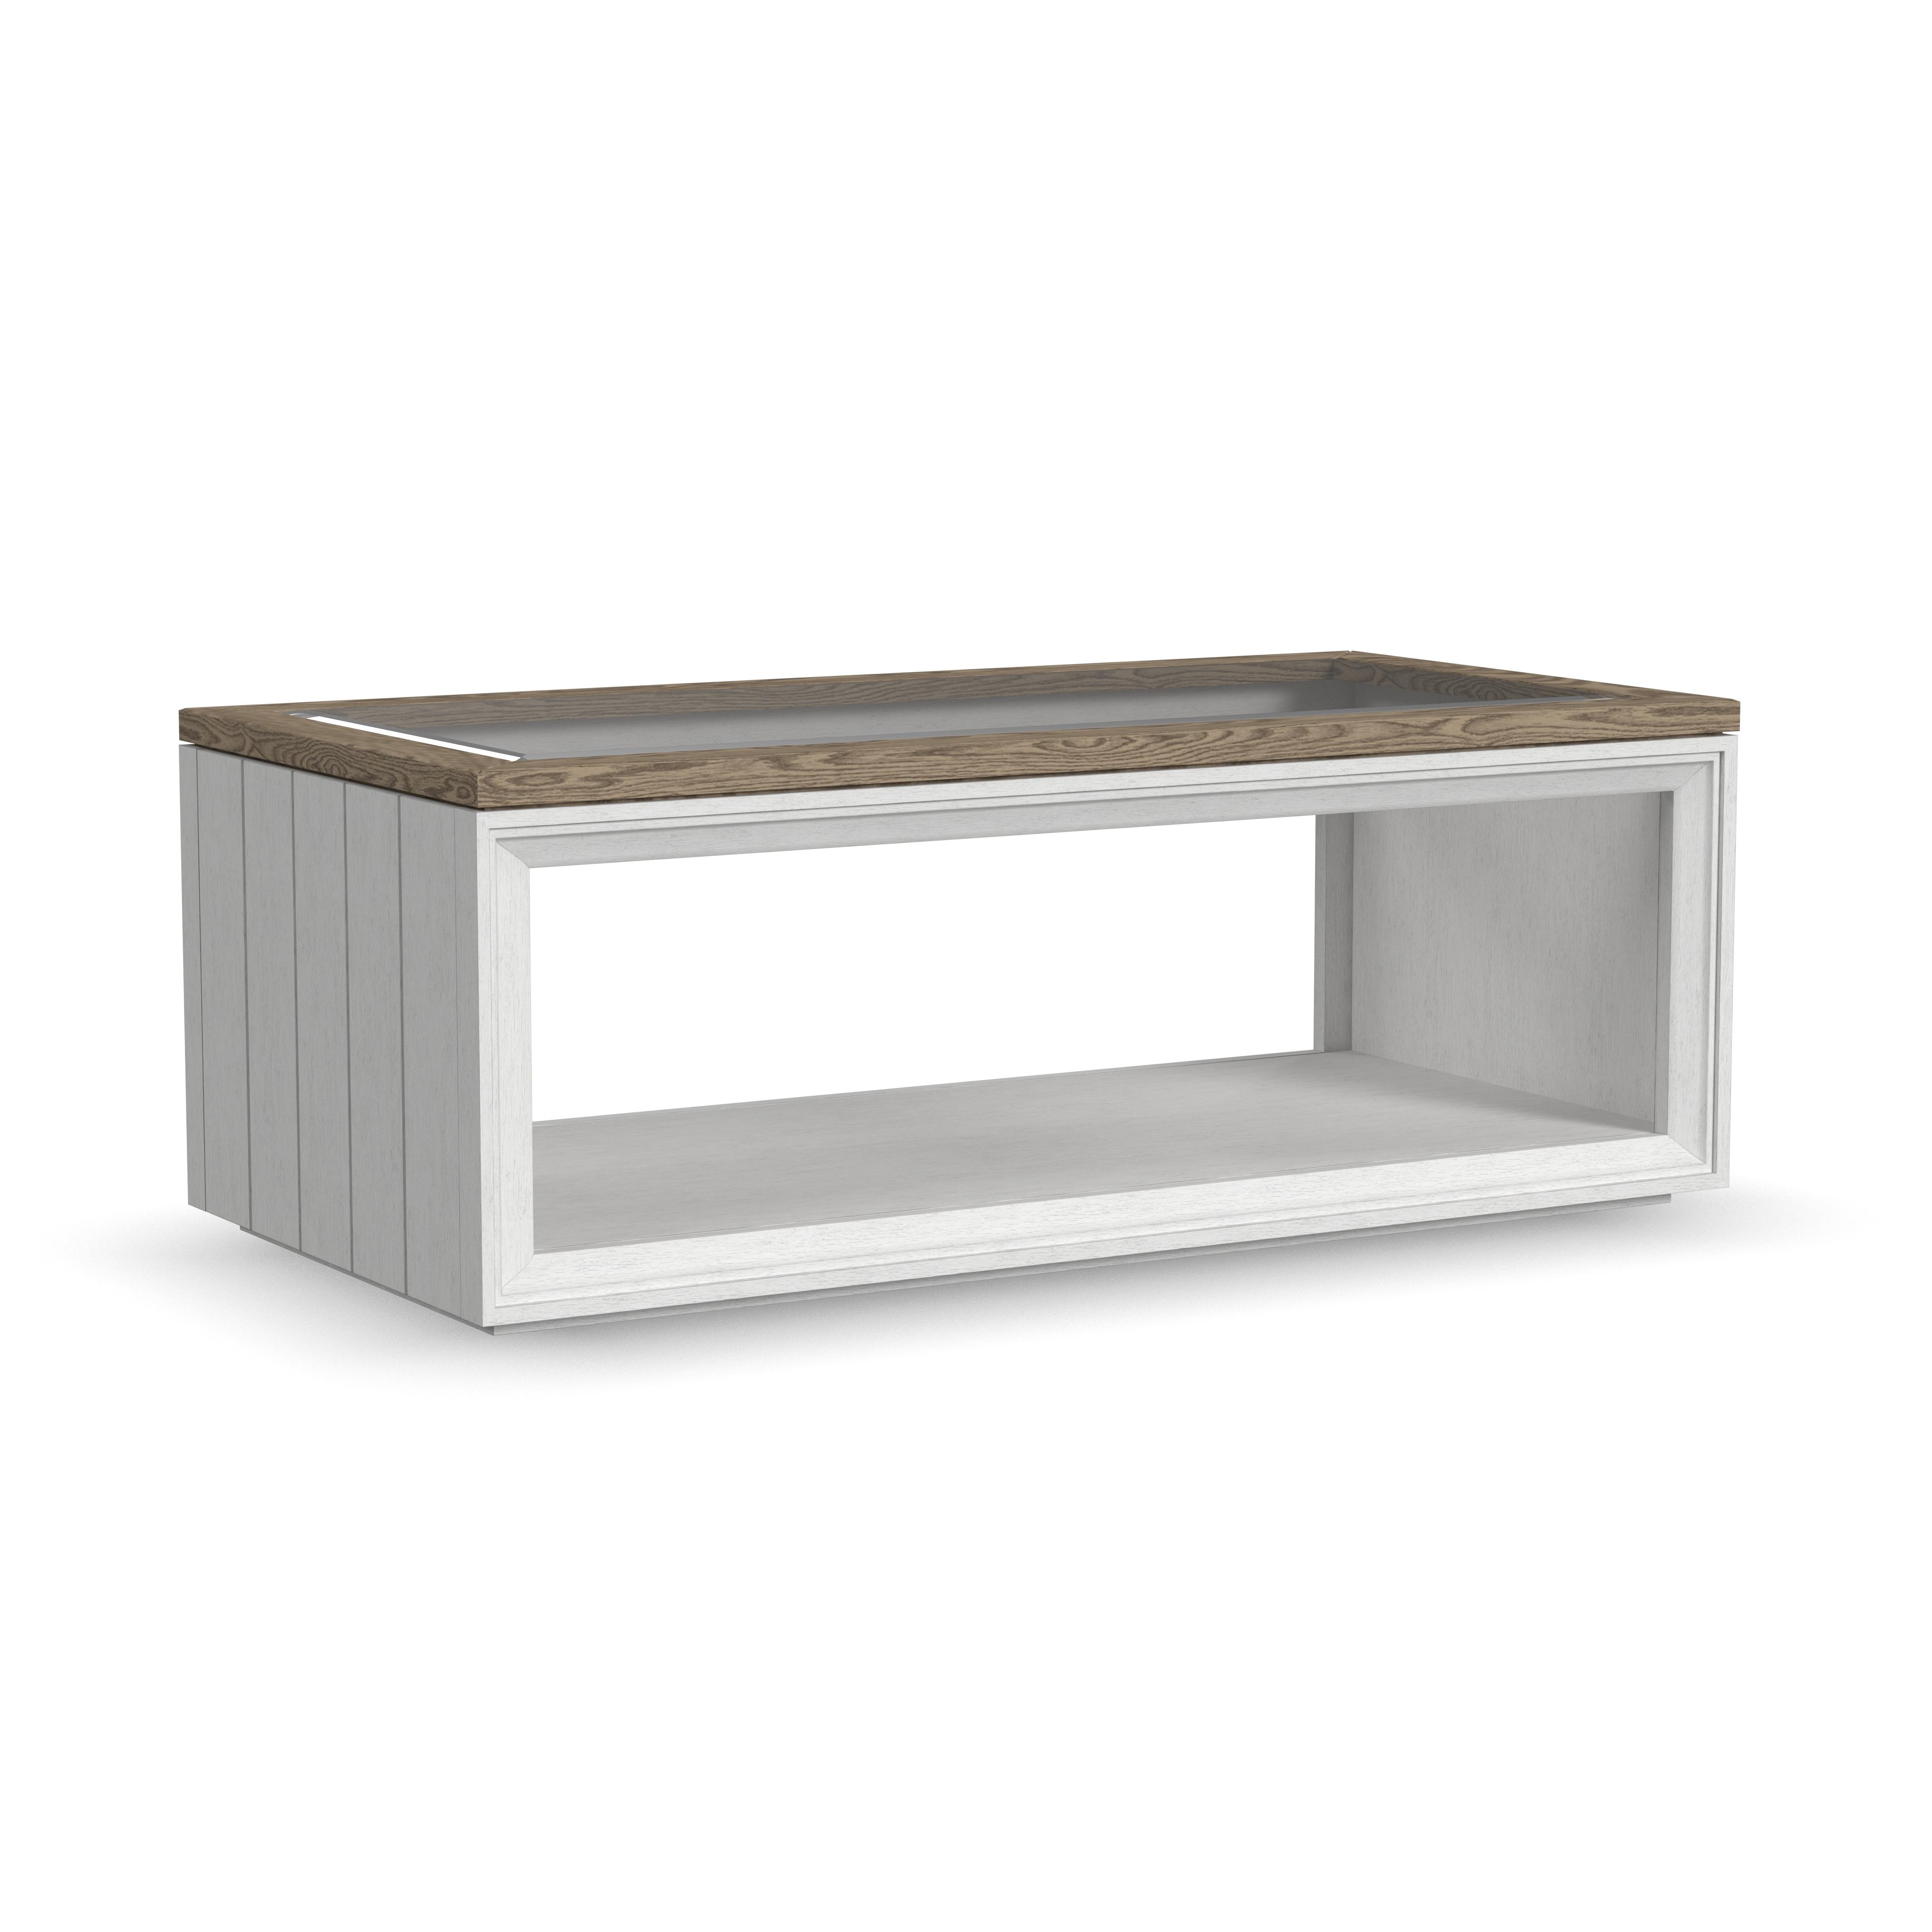 Flexsteel Melody Rectangular Coffee Table with Casters